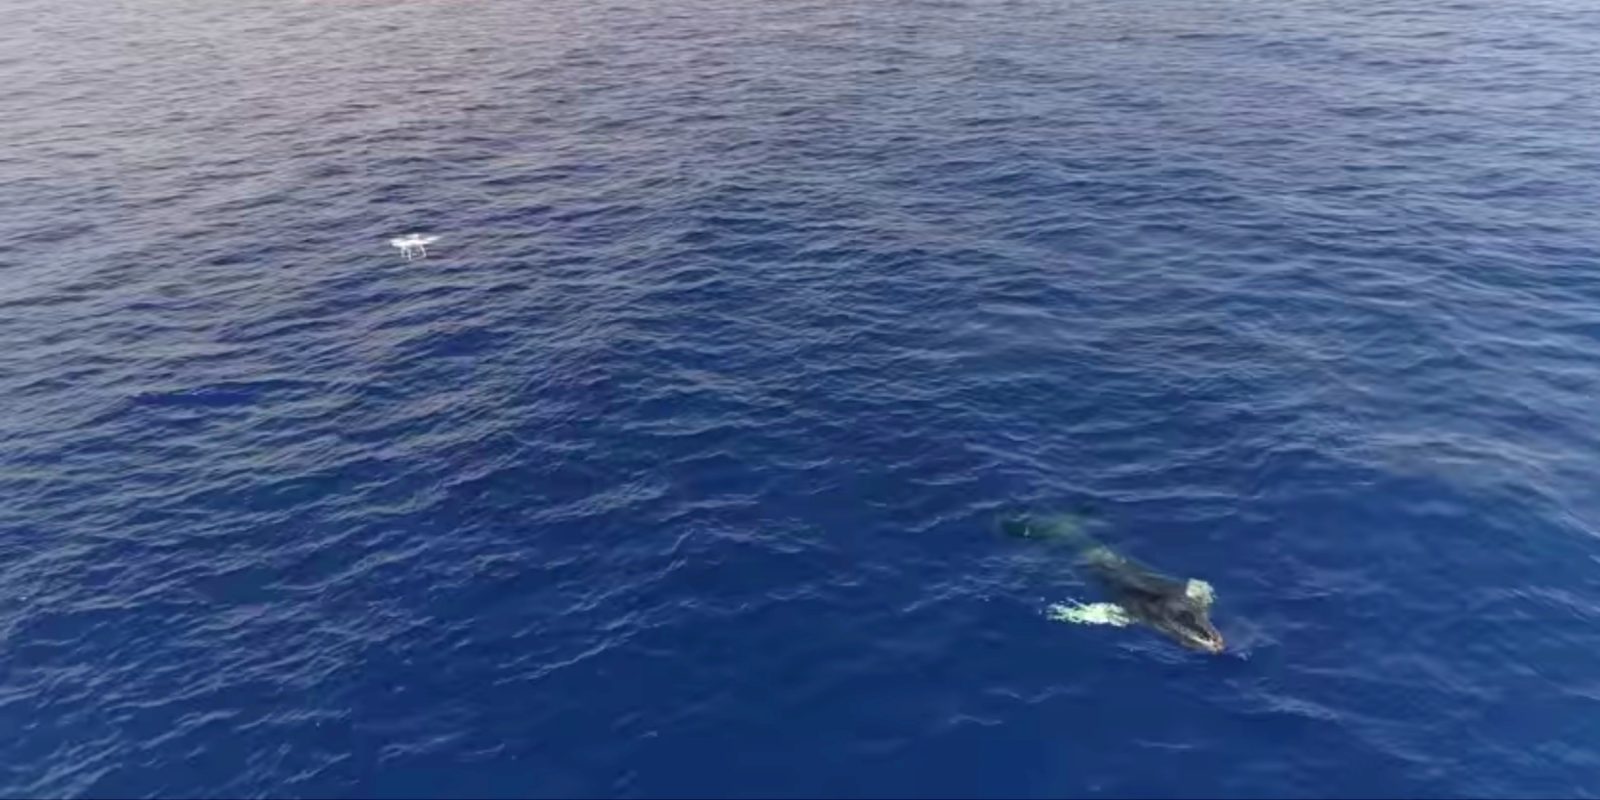 Drones are a valuable tool in freeing whales from lines and fishing nets